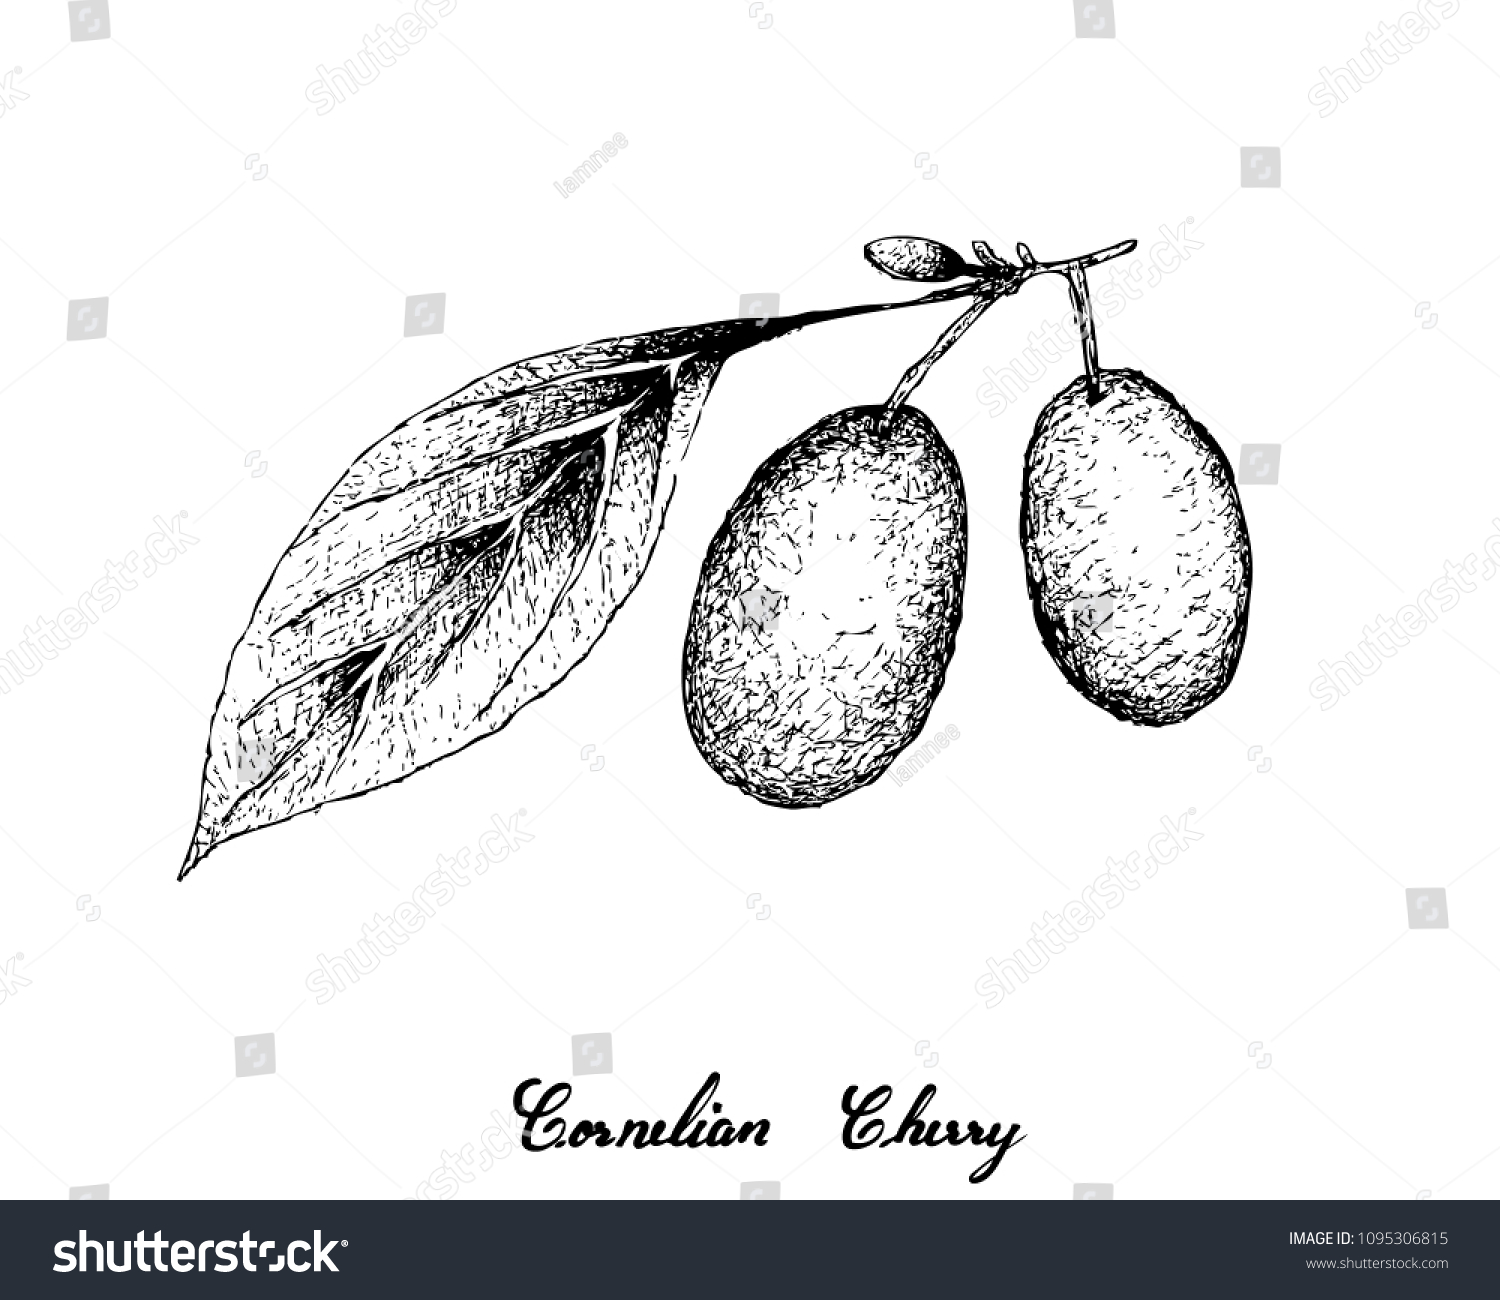 SVG of Tropical Fruits, Fresh Cornelian Cherries or Cornus Mas Fruits Hanging on Tree Branch Isolated on White Background. Large Amounts of Antioxidants and Protection Against Chronic Disease. svg